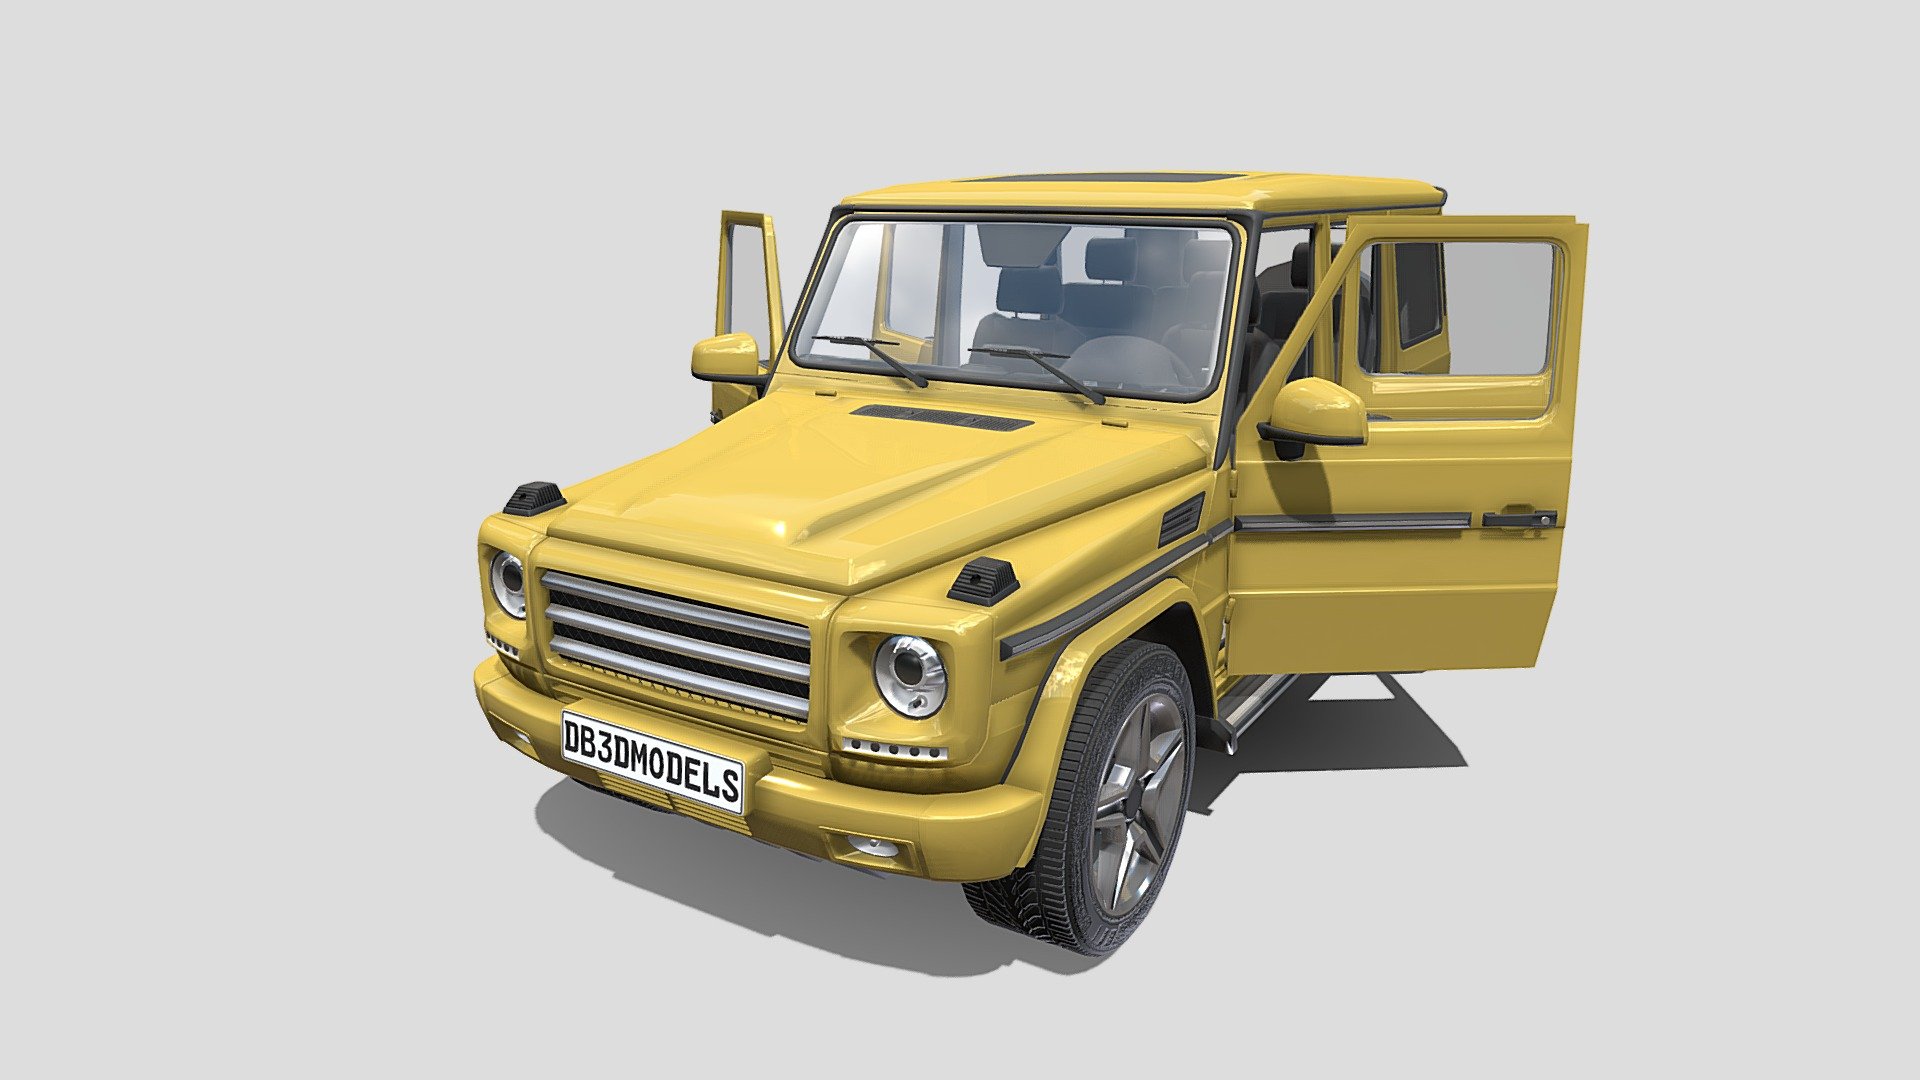 Highly detailed Generic SUV with a detailed interior 3d model rendered with Cycles in Blender, as per seen on attached images. 
The 3d model is scaled to original size in Blender.

File formats:
-.blend, rendered with cycles, as seen in the images;
-.blend, open, rendered with cycles, as seen in the images;
-.obj, with materials applied;
-.obj, open, with materials applied;
-.dae, with materials applied;
-.dae, open, with materials applied;
-.fbx, with materials applied;
-.fbx, open, with materials applied;
-.stl;
-.stl, open;

Files come named appropriately and split by file format.

3D Software:
The 3D model was originally created in Blender 2.8 and rendered with Cycles.

Materials and textures:
The models have materials applied in all formats, and are ready to import and render.
The models come with four png textures(one for the number plate, which can easily be removed).

For any problems please feel free to contact me.

Don't forget to rate and enjoy! - Generic Luxury SUV with interior - Buy Royalty Free 3D model by dragosburian 3d model